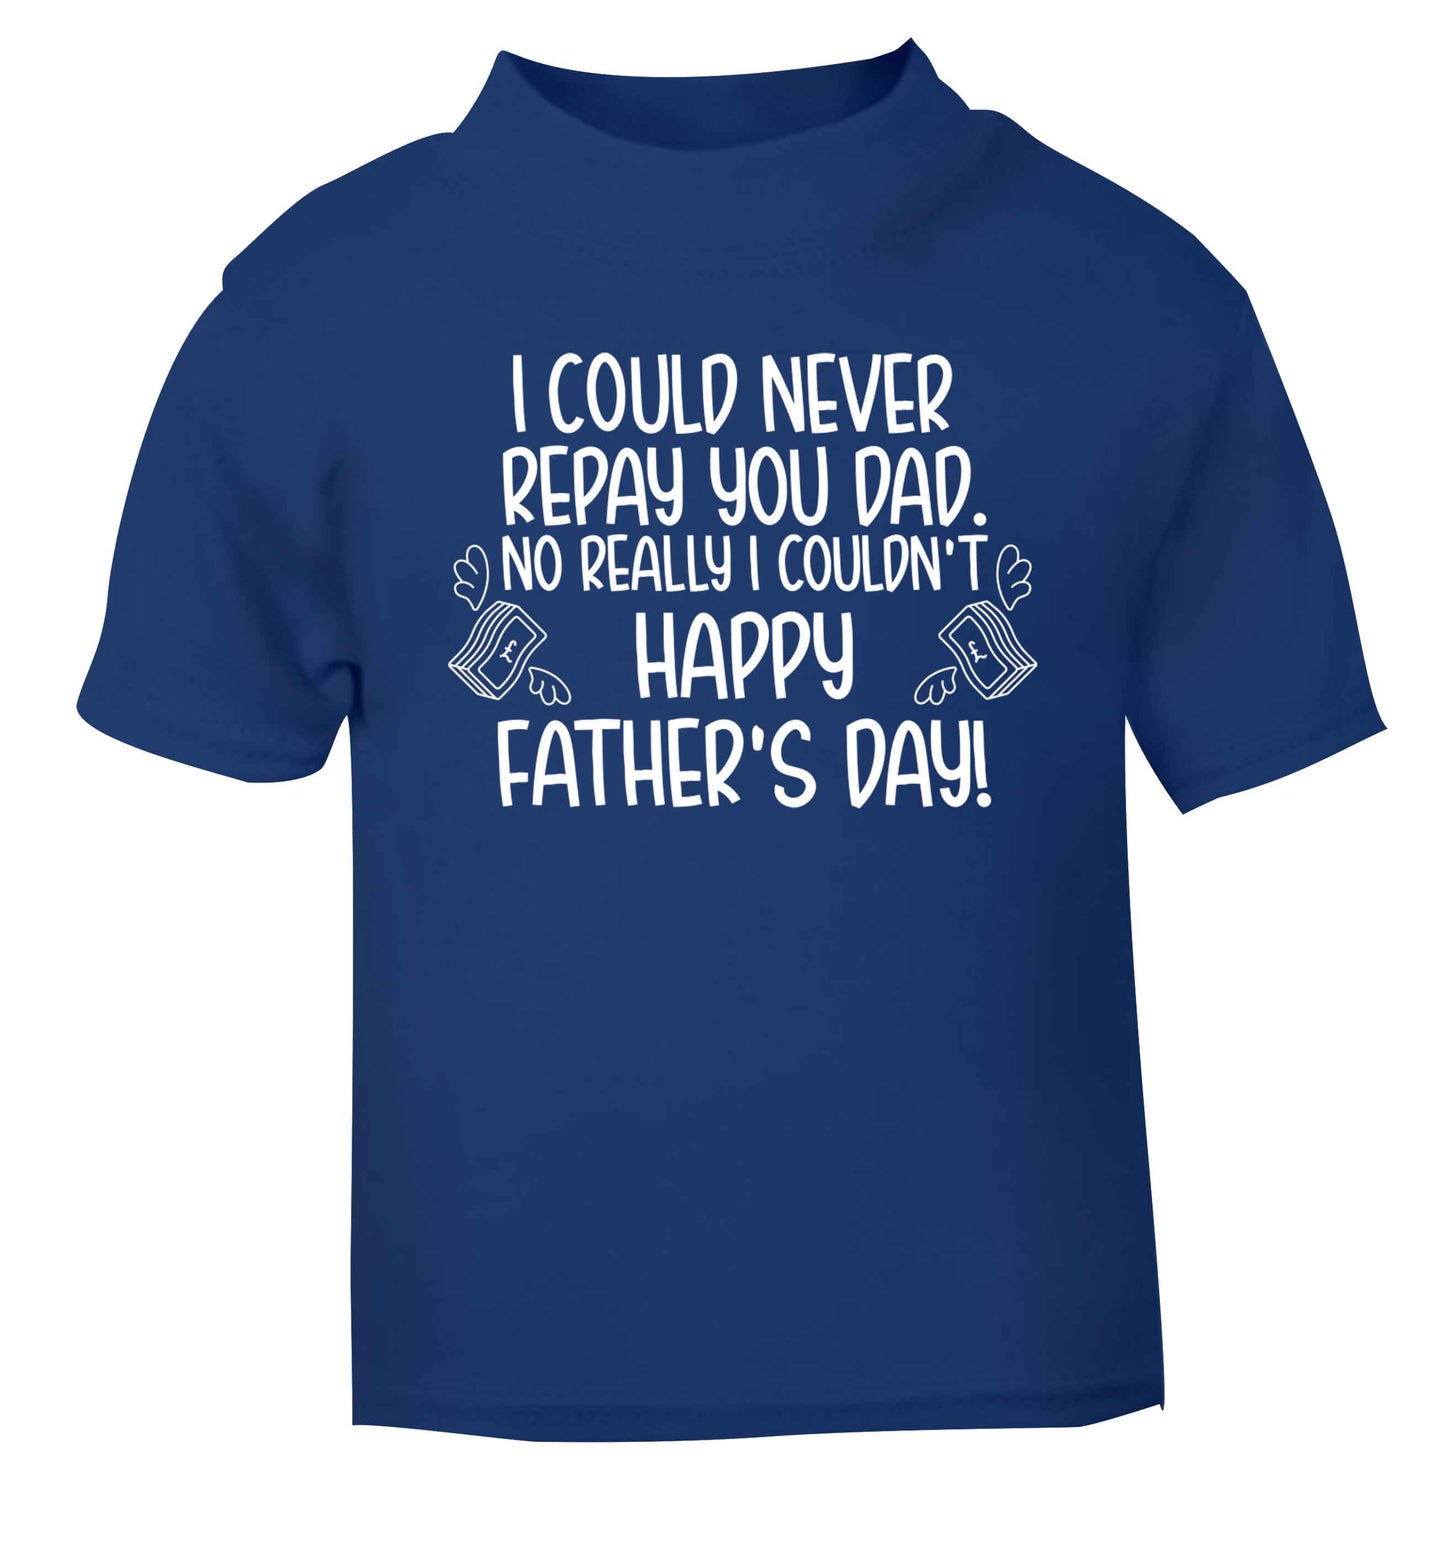 I could never repay you dad. No I really couldn't happy Father's day! blue baby toddler Tshirt 2 Years